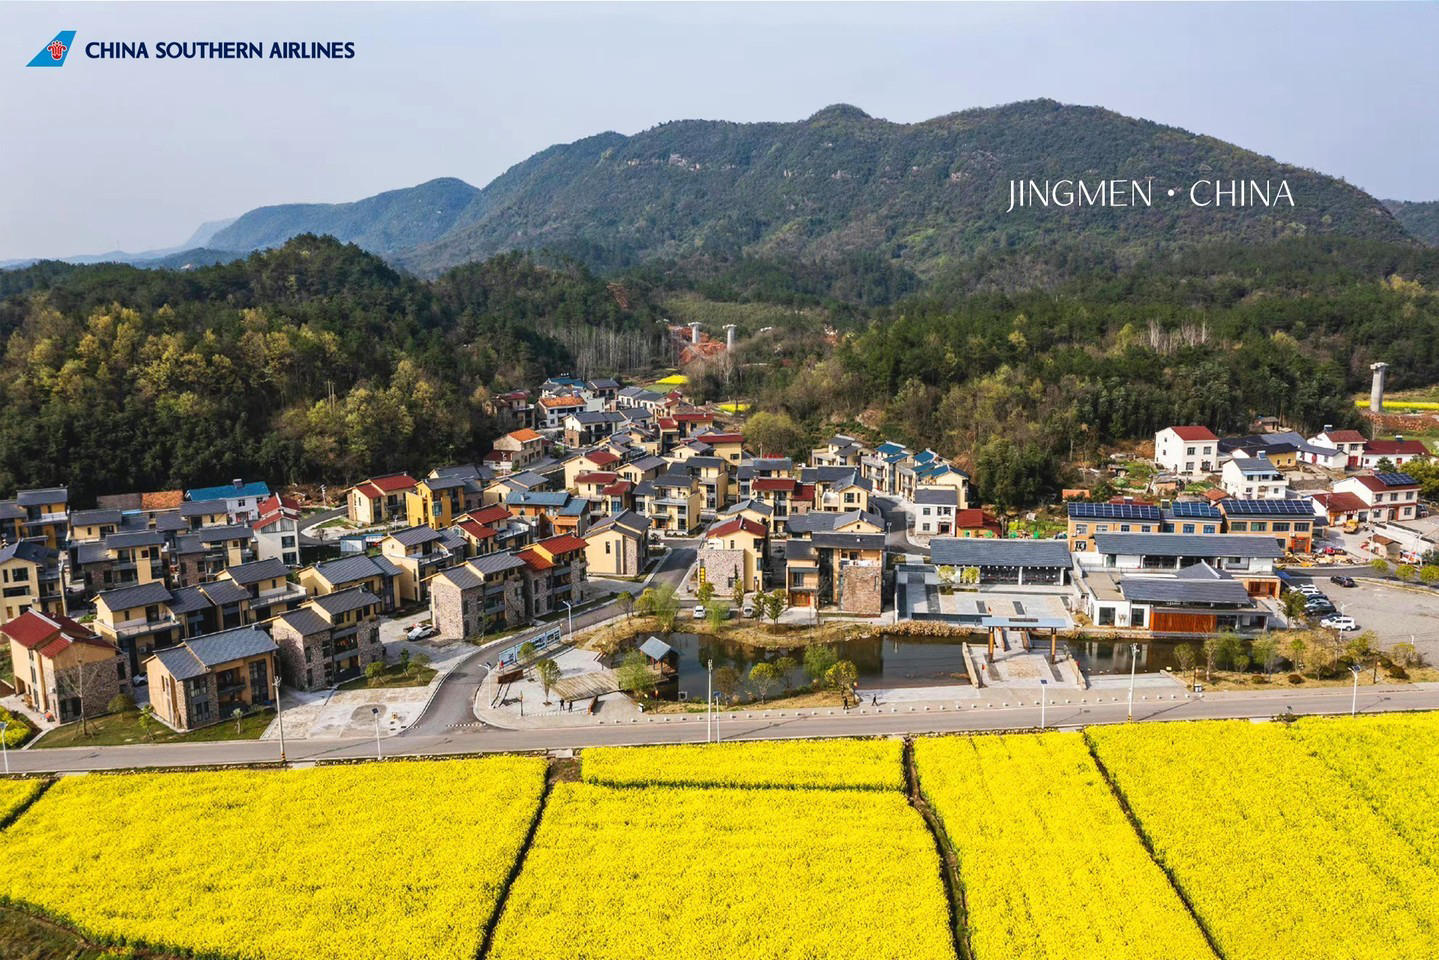 China Southern Airlines - #Jingmen is known for its unique culture and history, making it a must-see